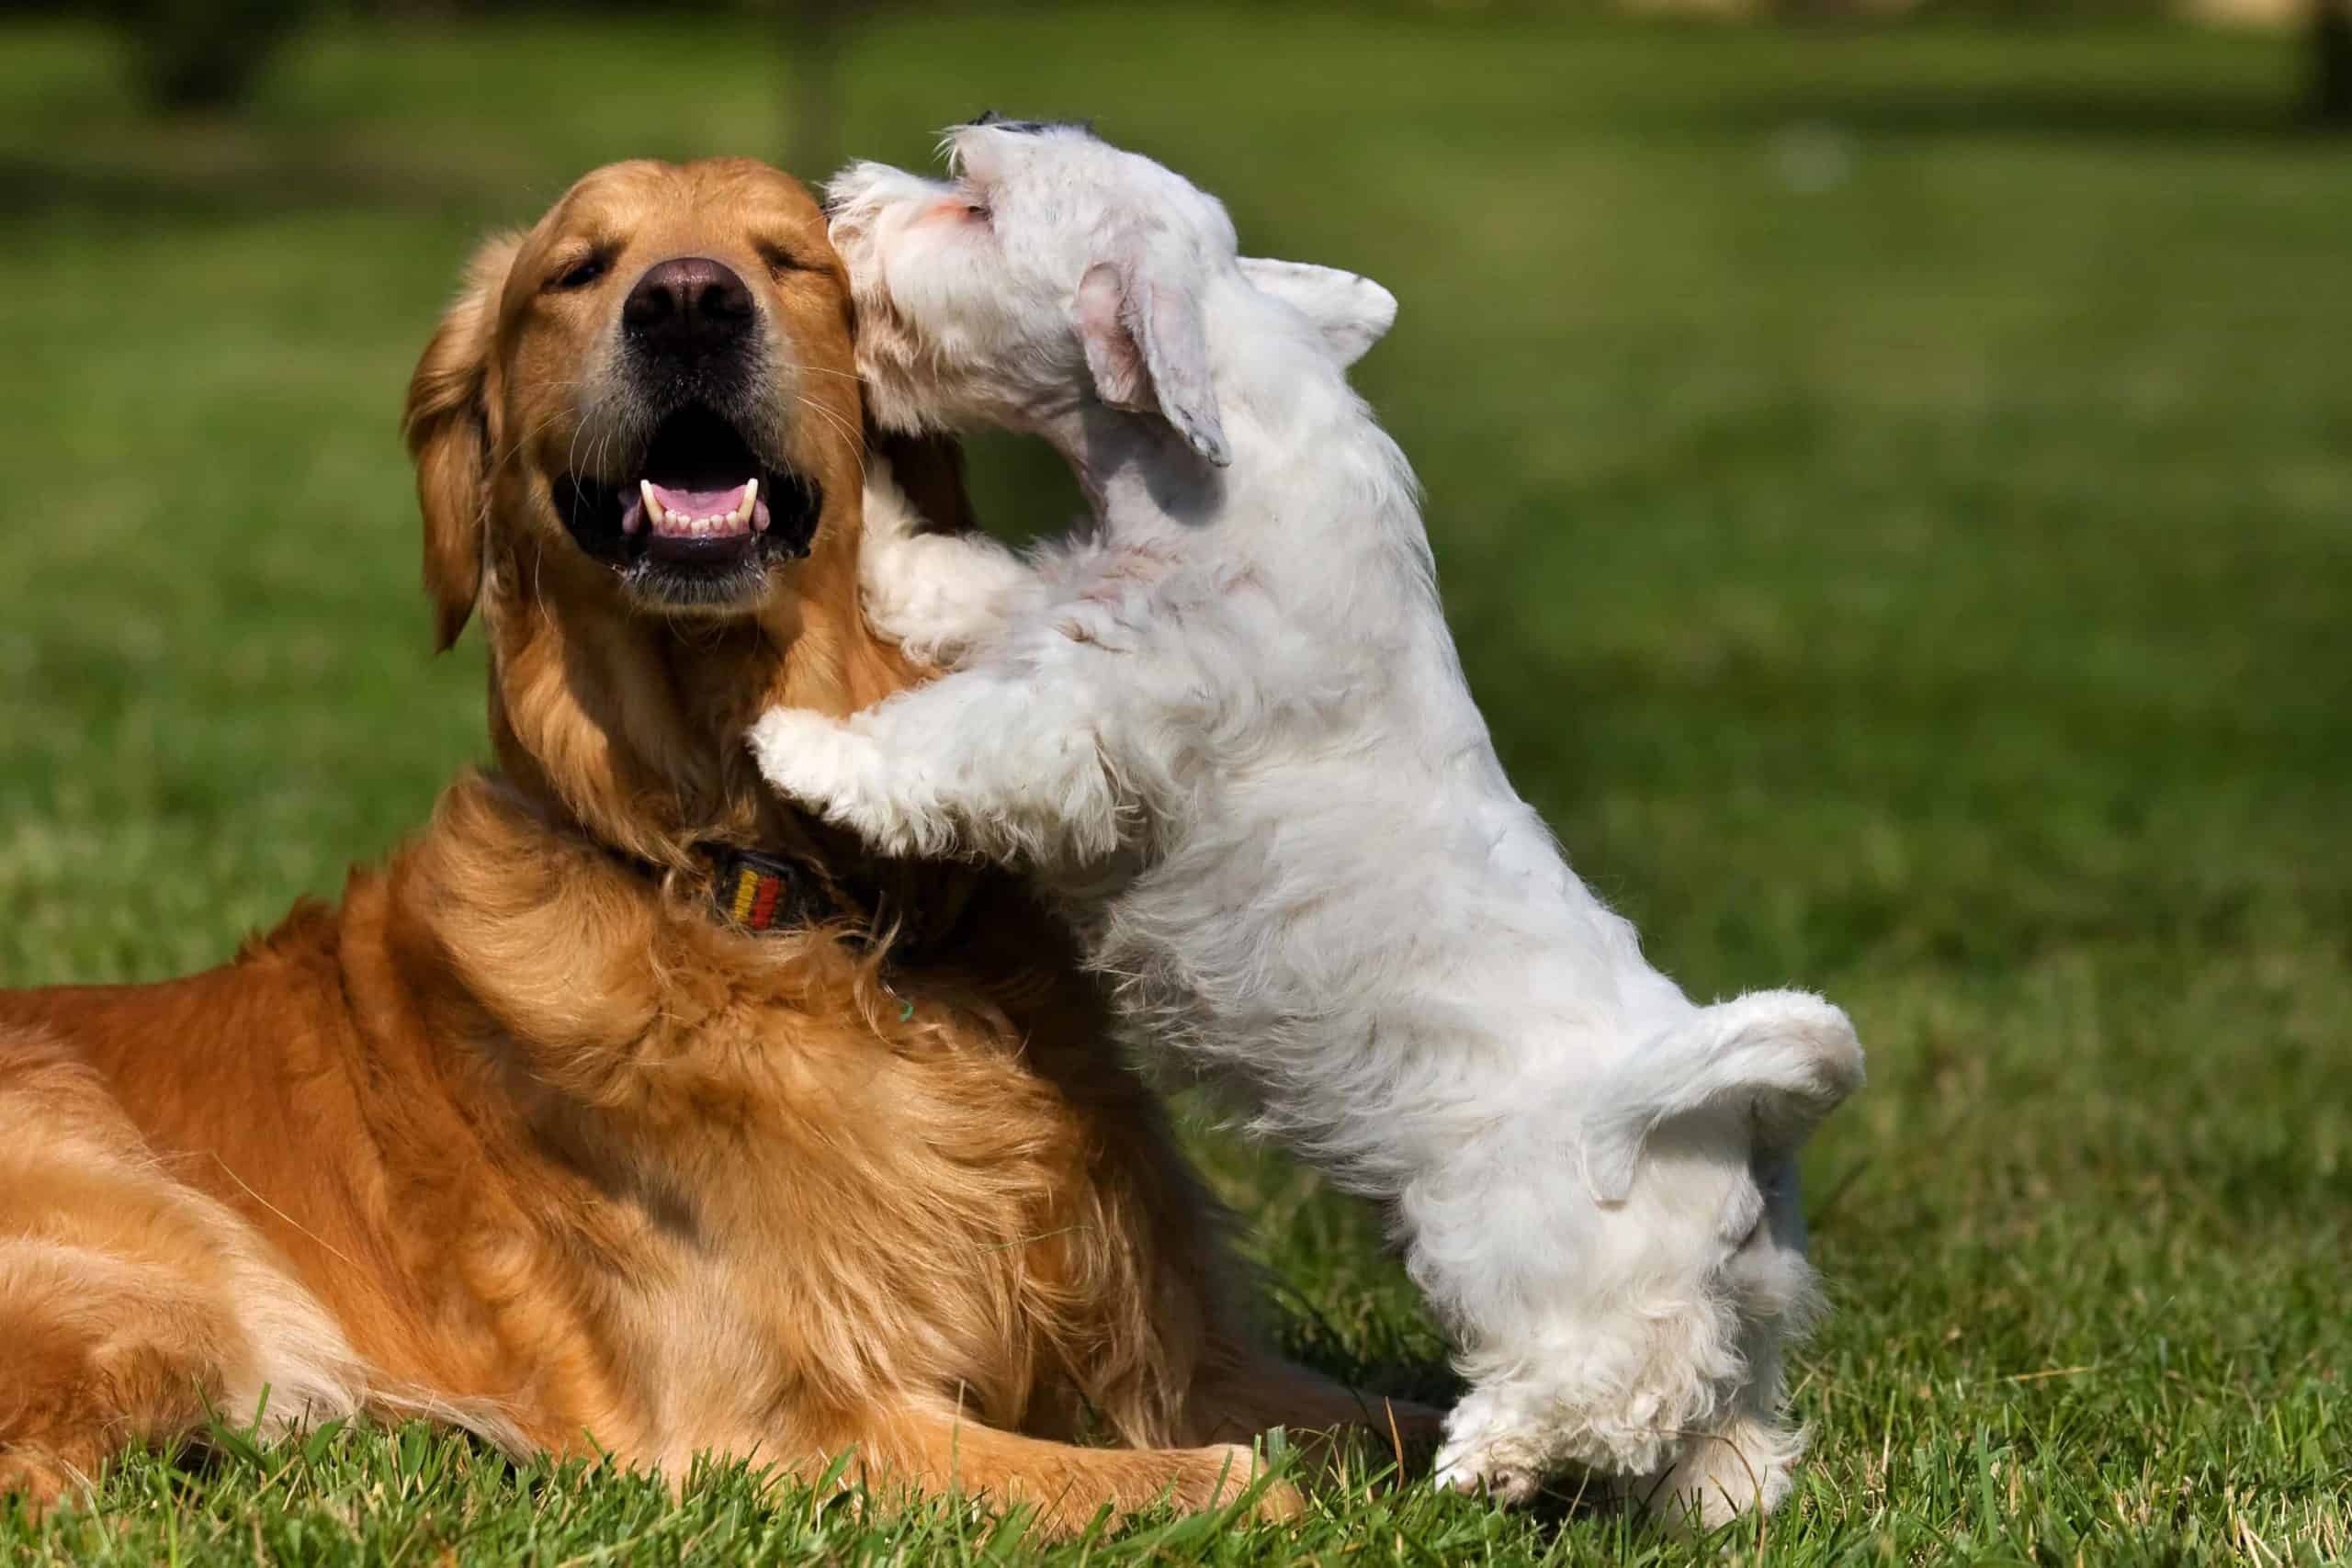 Westie kisses Golden Retriever. Before you teach your dog how to socialize, make sure he follows commands. Then, start slowly when your dog is young and keep sessions short.